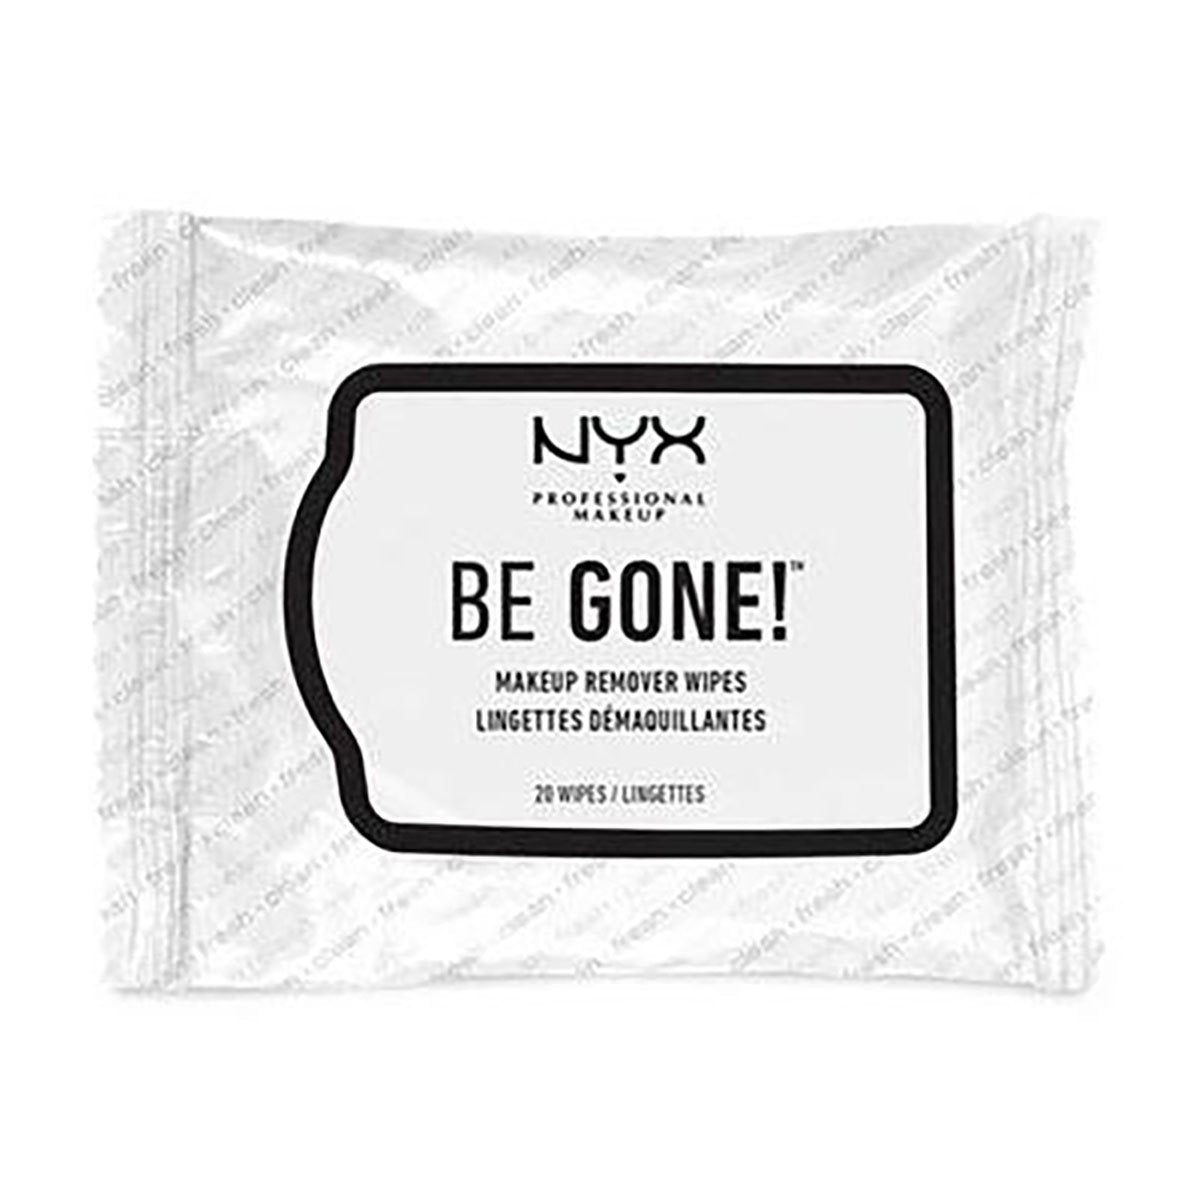 NYX - Be Gone Makeup Remover Wipes - 01